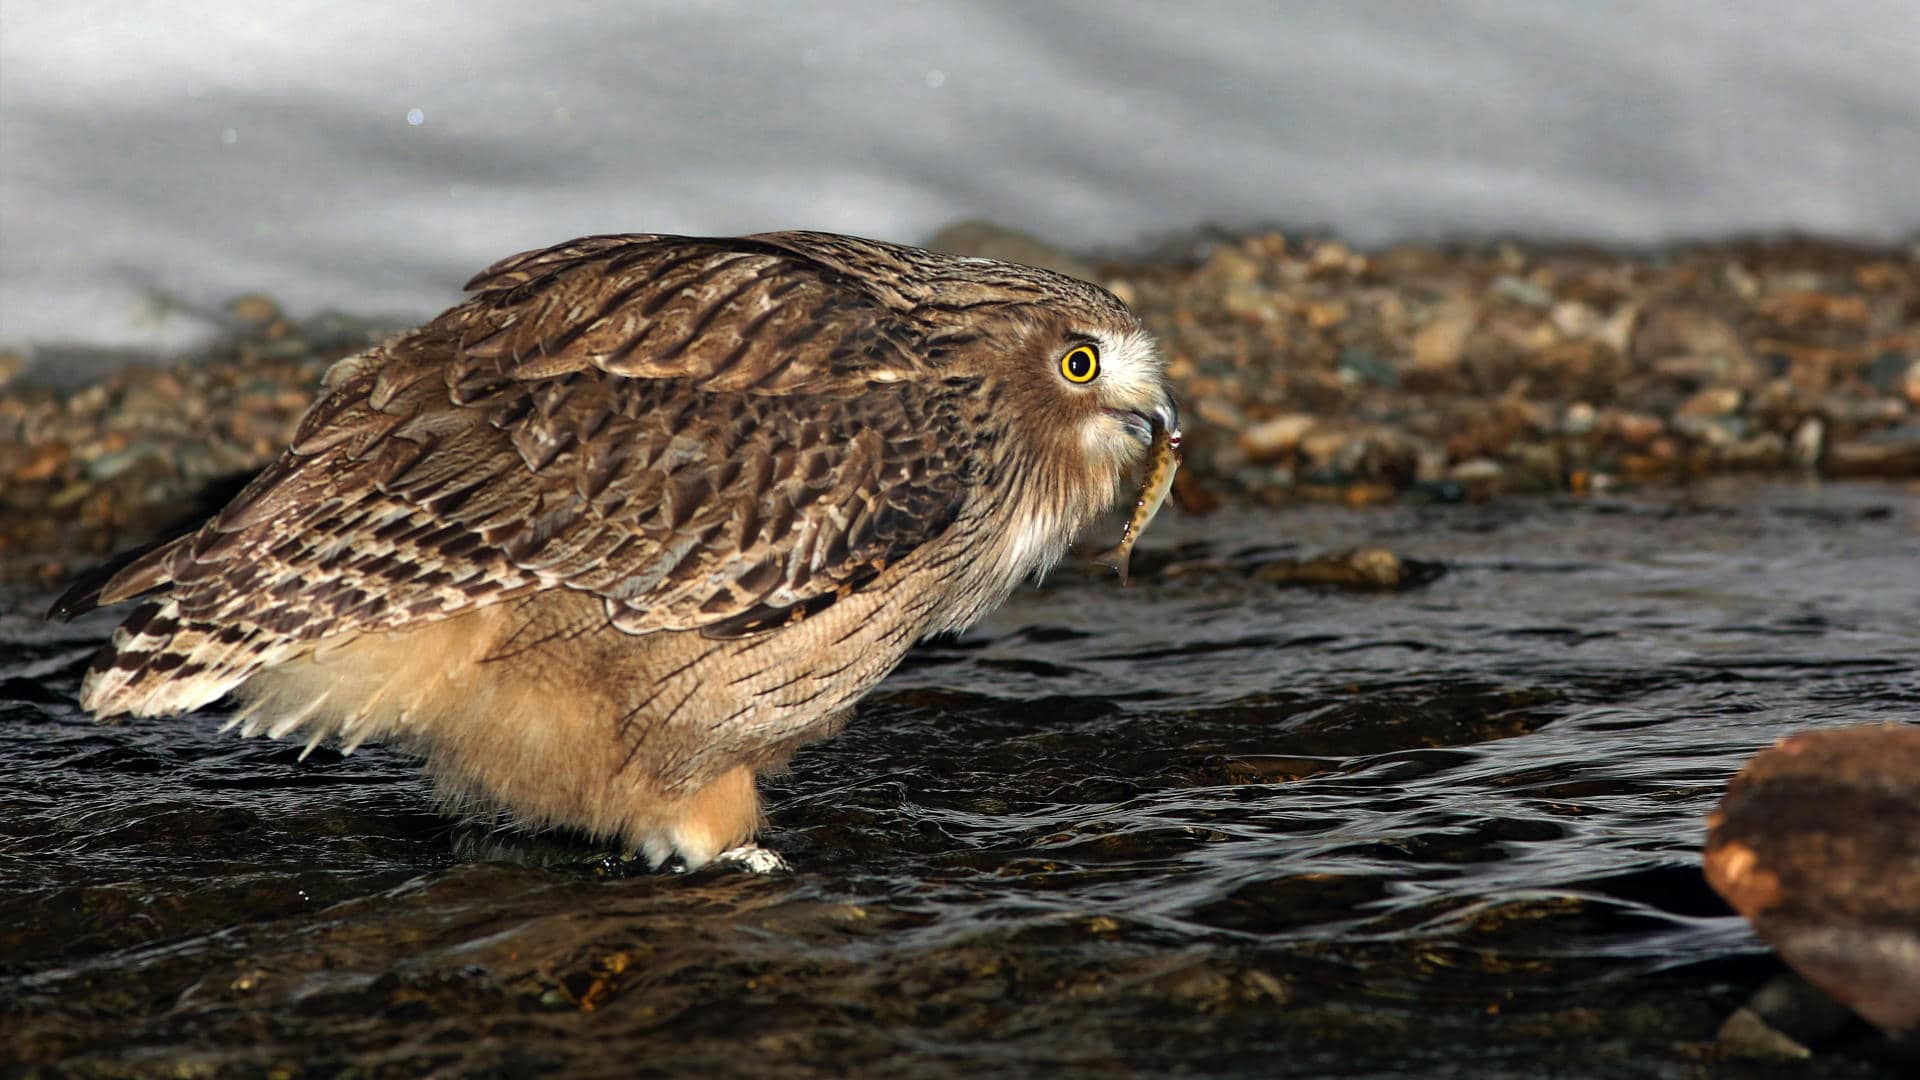 A Blakiston’s fish owl pauses in shallow river water with its fresh kill, a young masu salmon, before swallowing it whole.